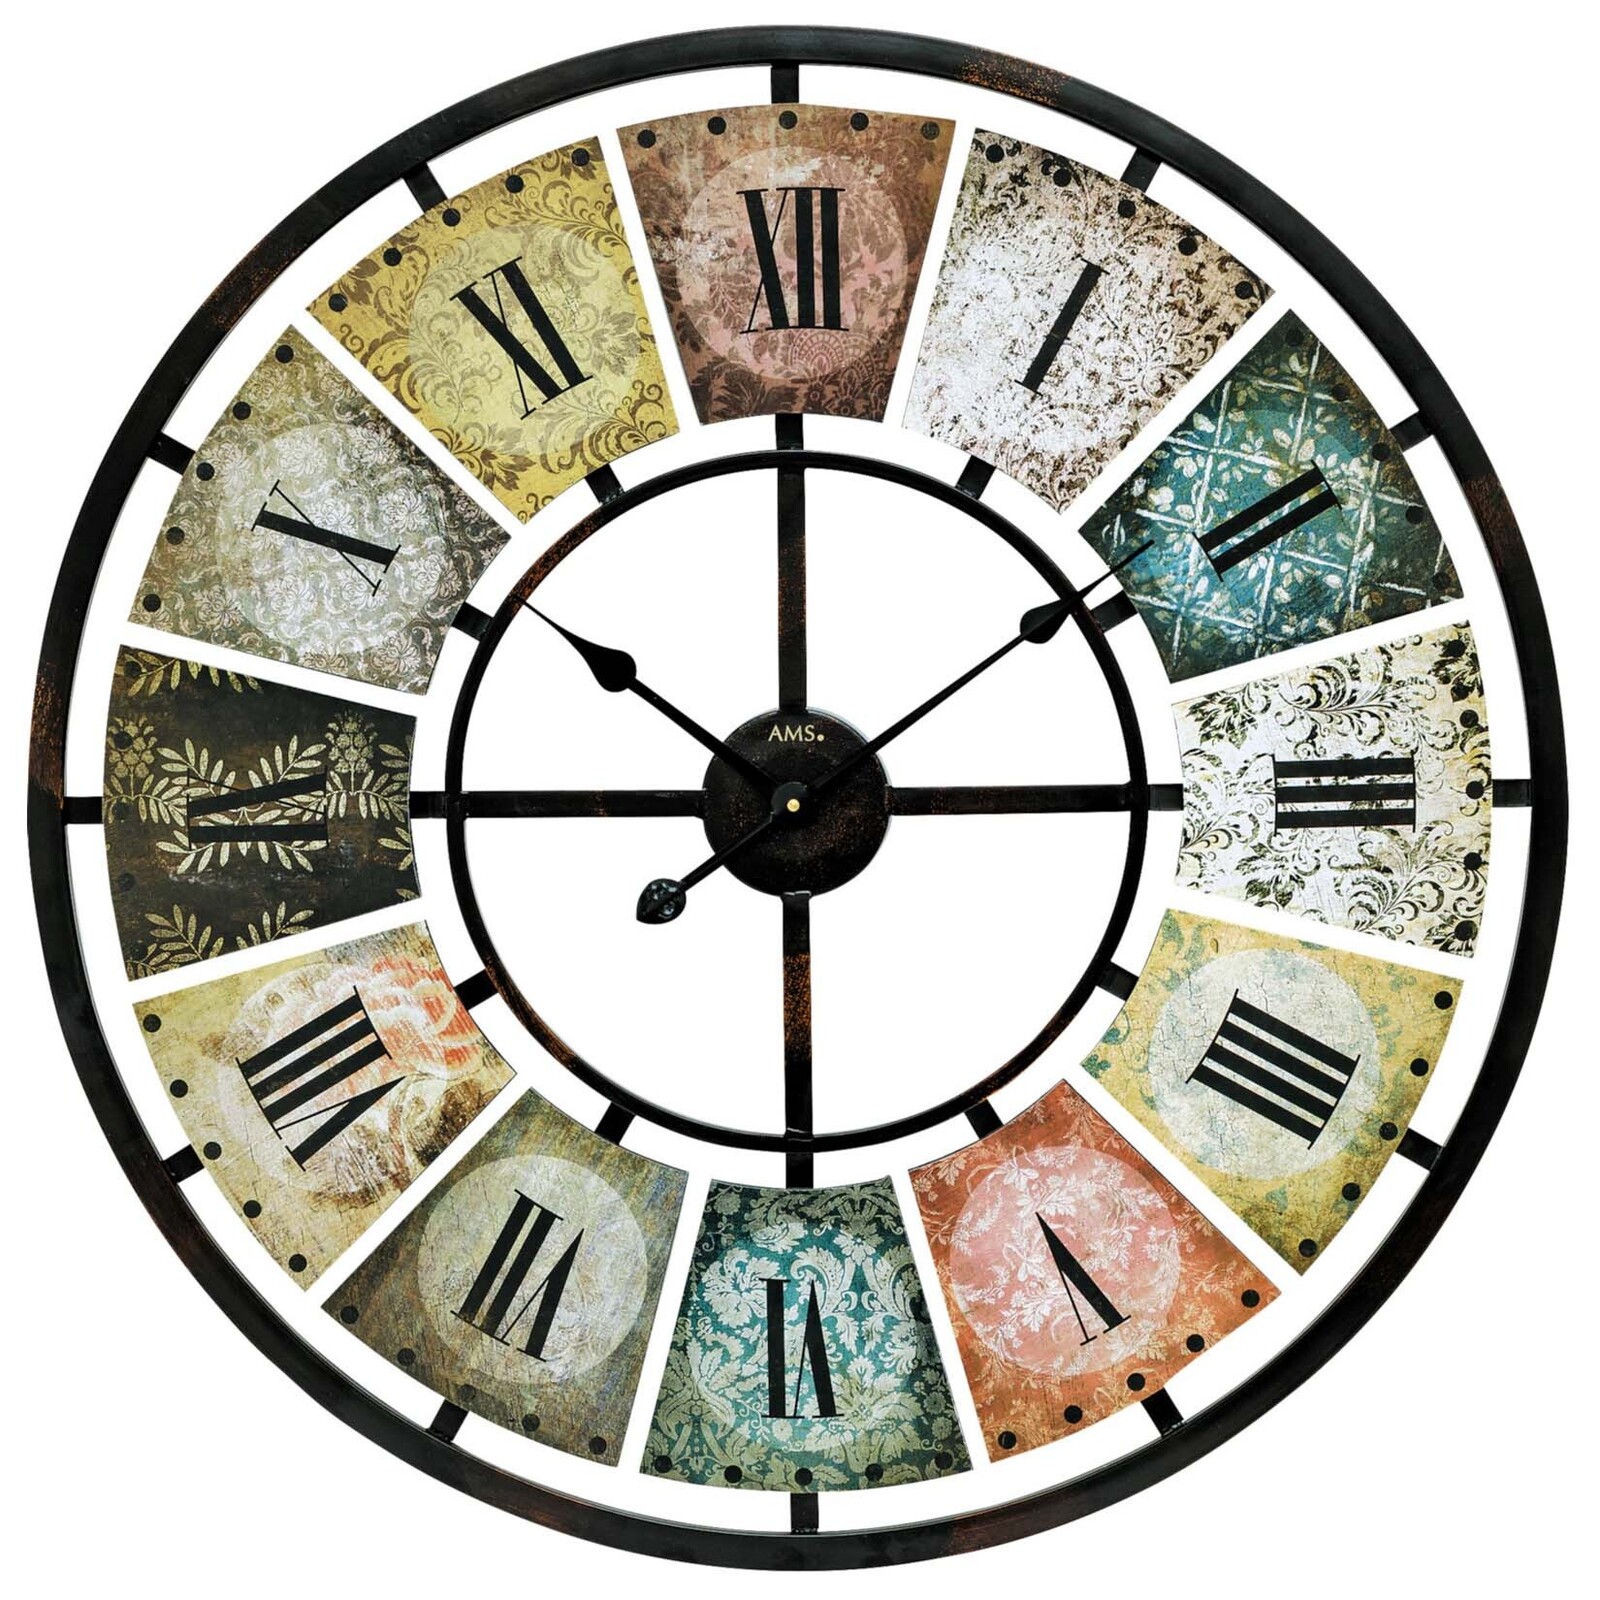 80cm Multi Coloured Round Metal Wall Clock With Roman Numerals By AMS ...